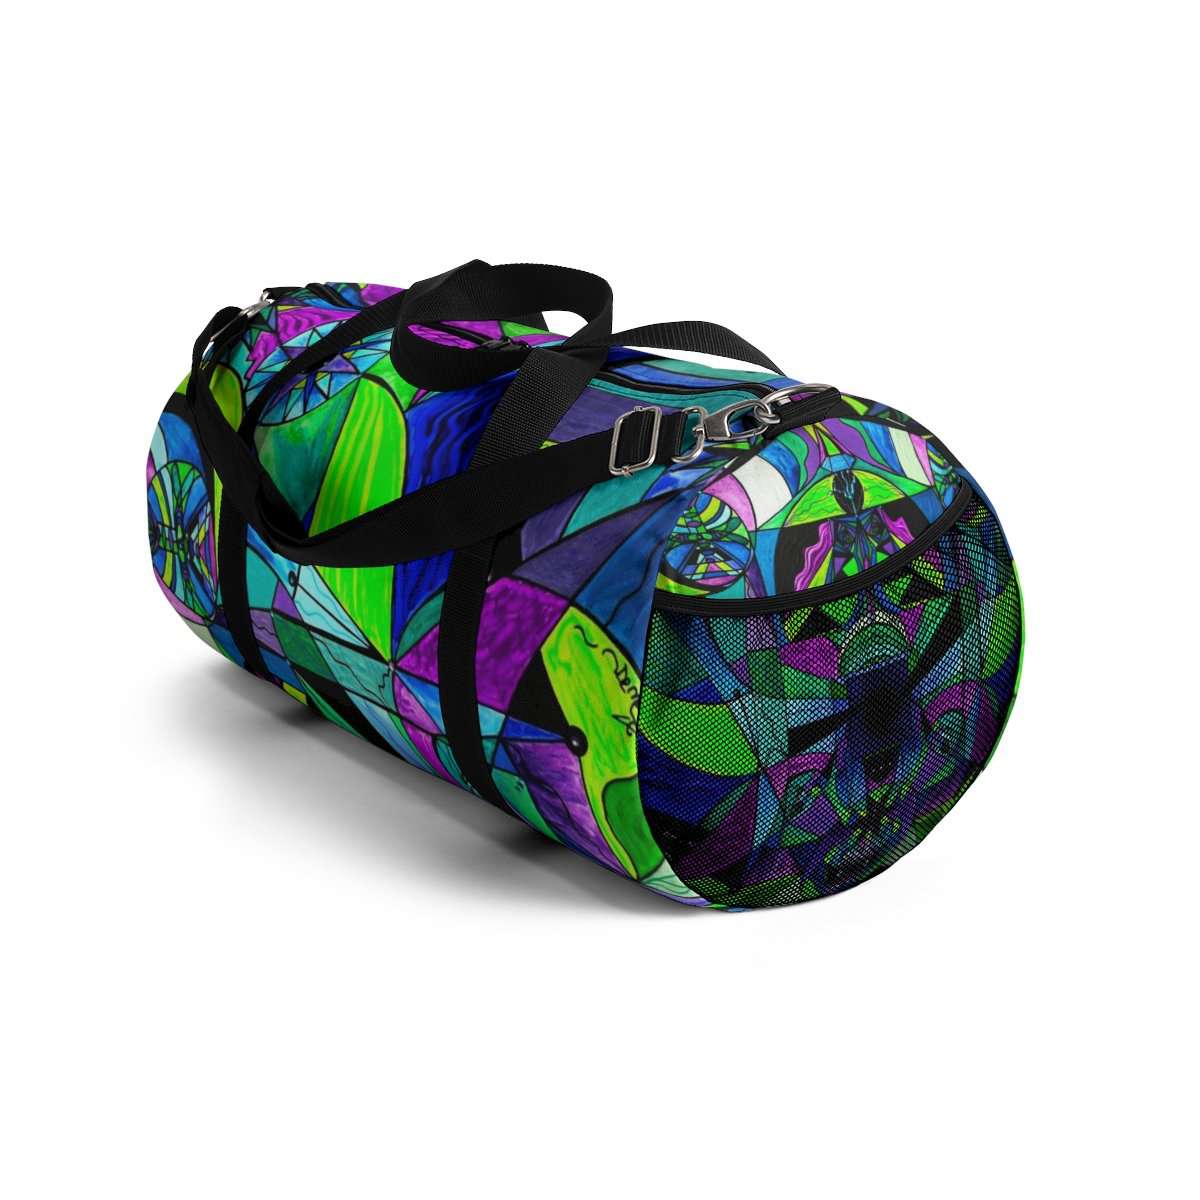 shop-online-and-get-your-favourite-arcturian-astral-travel-grid-duffle-bag-online_8.jpg